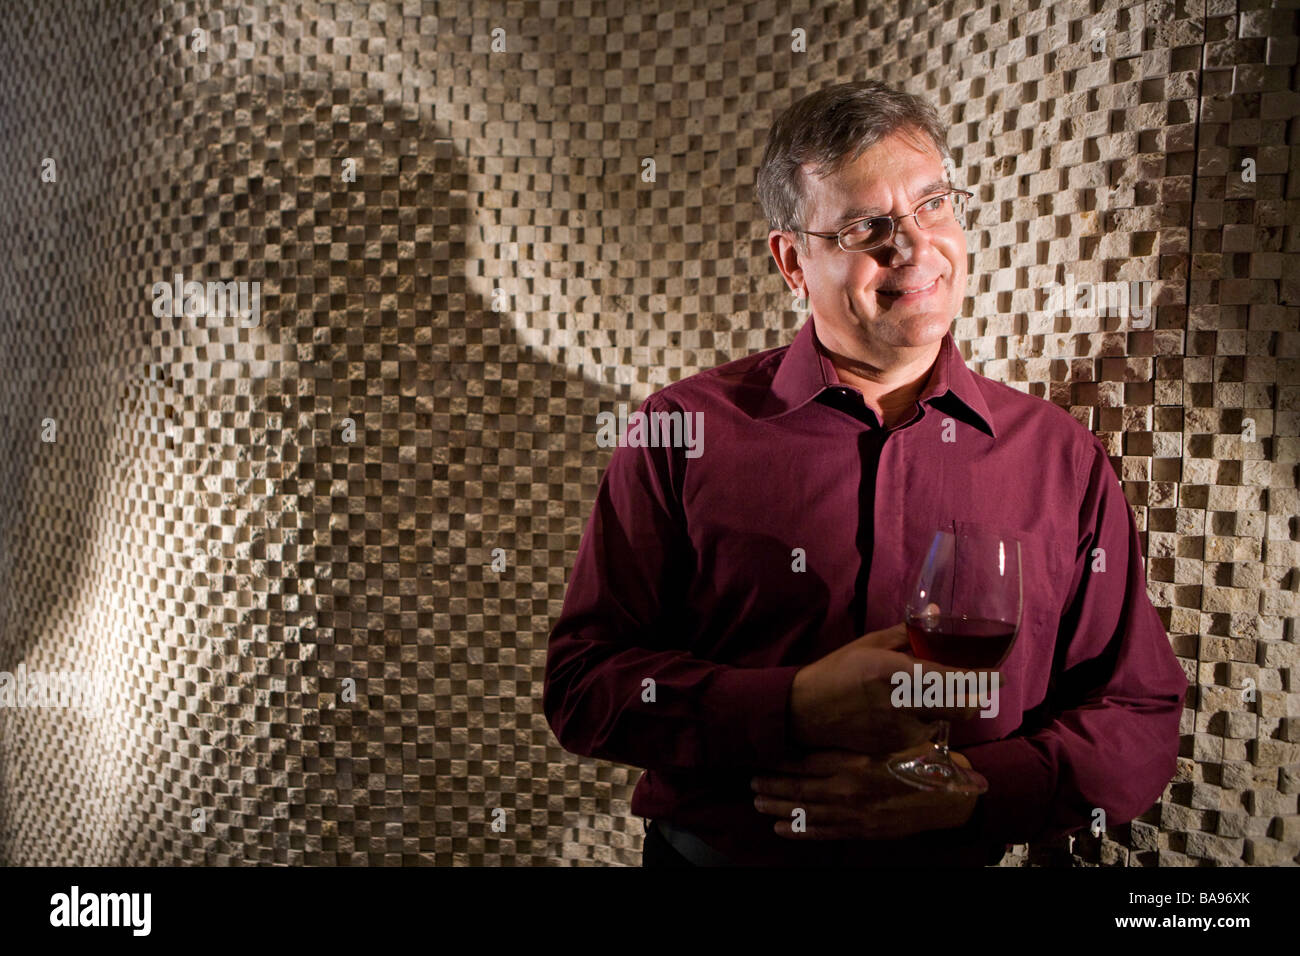 Mature man daydreaming while drinking glass of wine Stock Photo